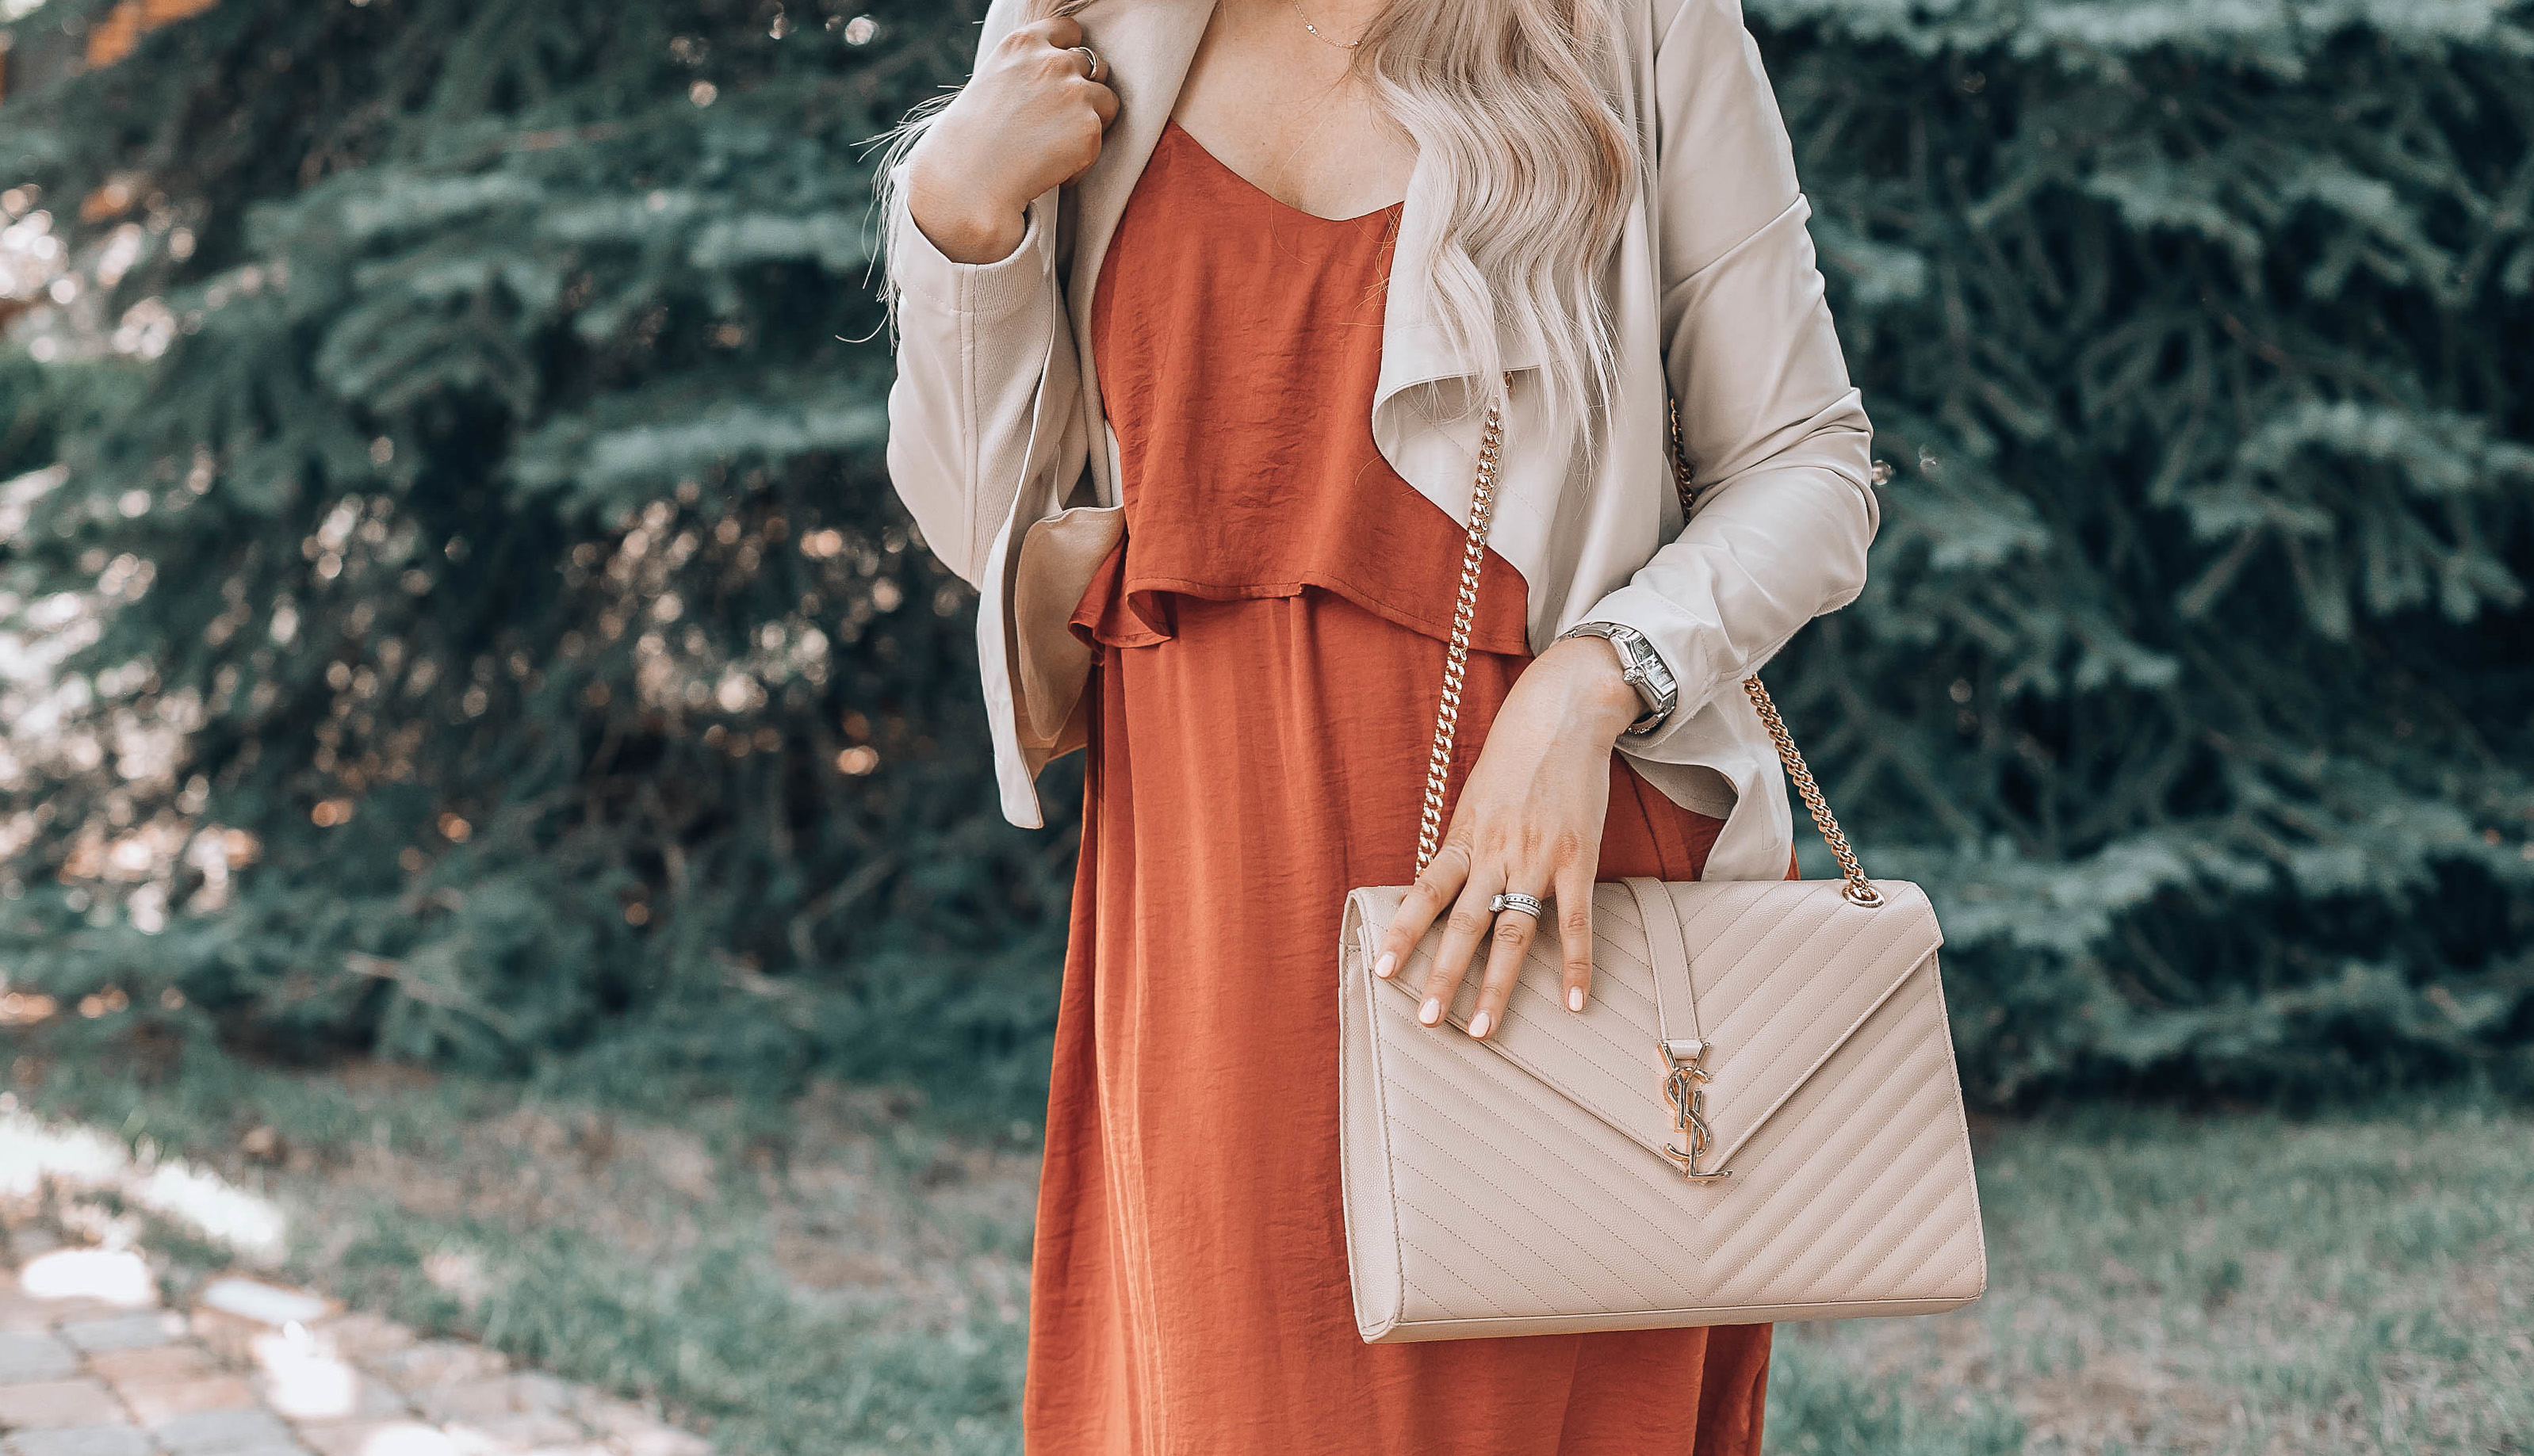 Emily Farren Wieczorek of Two Peas in a Prada shares her favorite dress from Destination Maternity in celebration of Breastfeeding Awareness Month! 